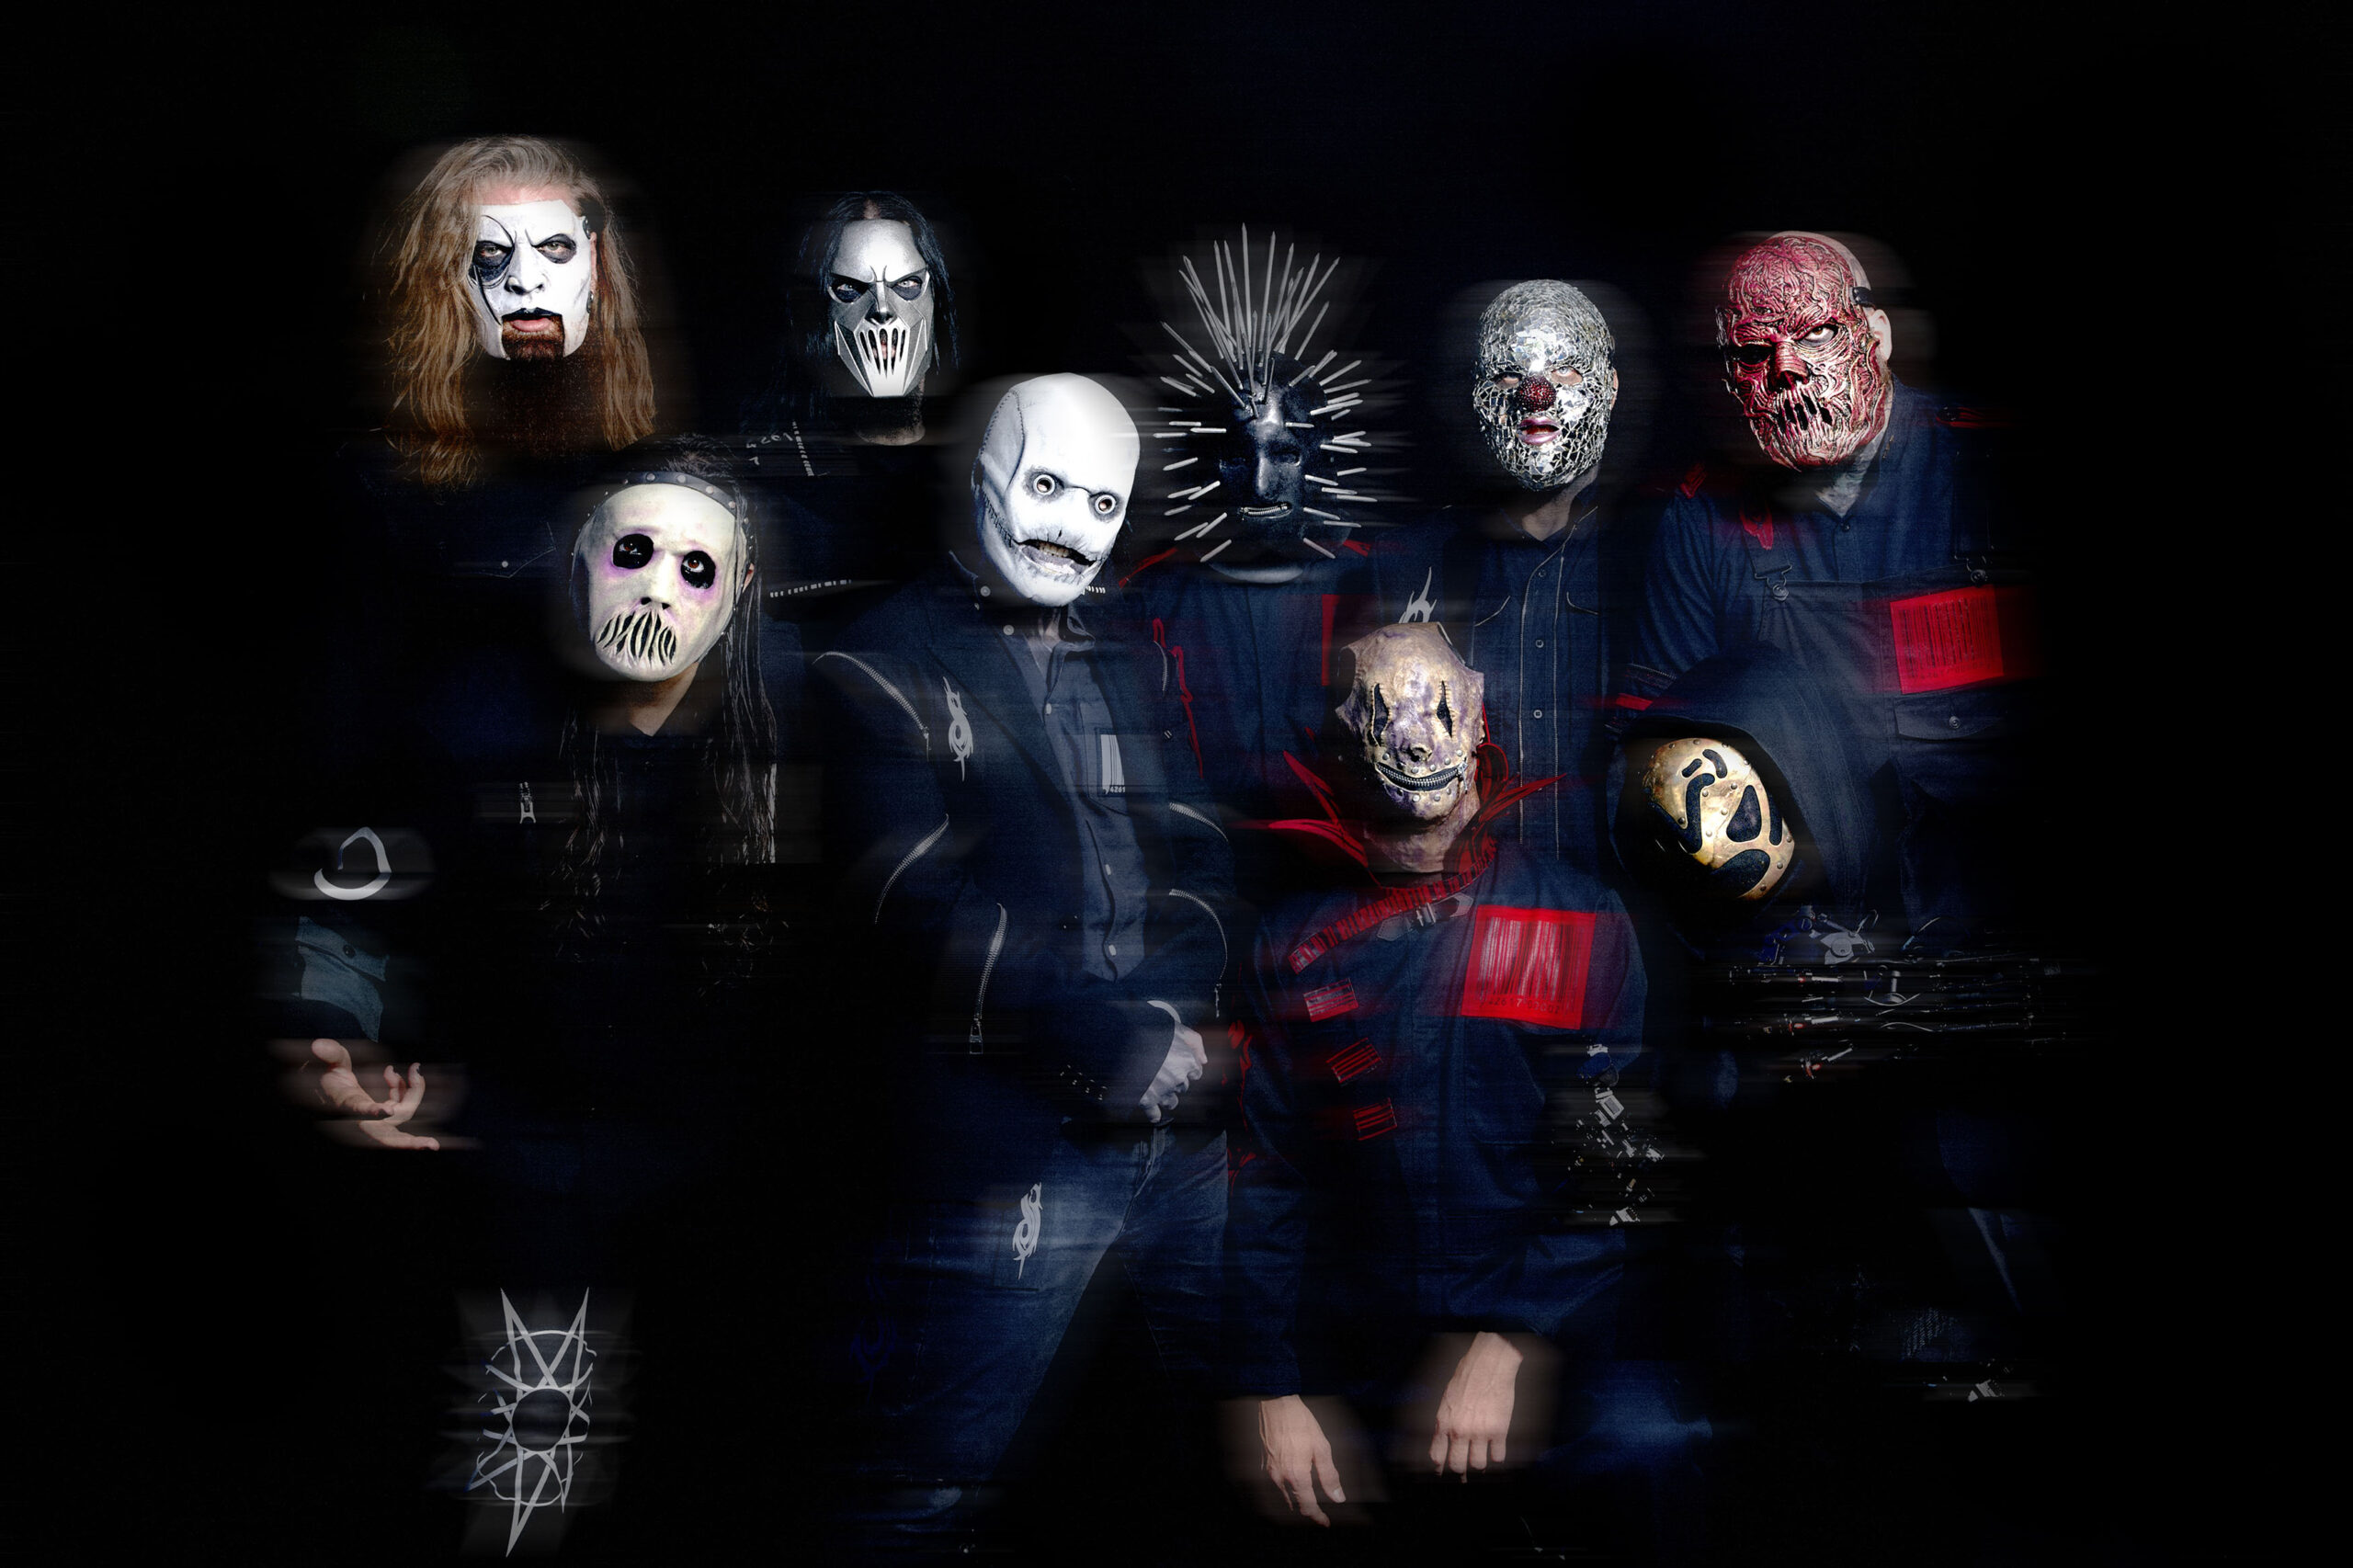 Slipknot Aim to 'Overpower' and 'Devour' on New Single, 'Yen'